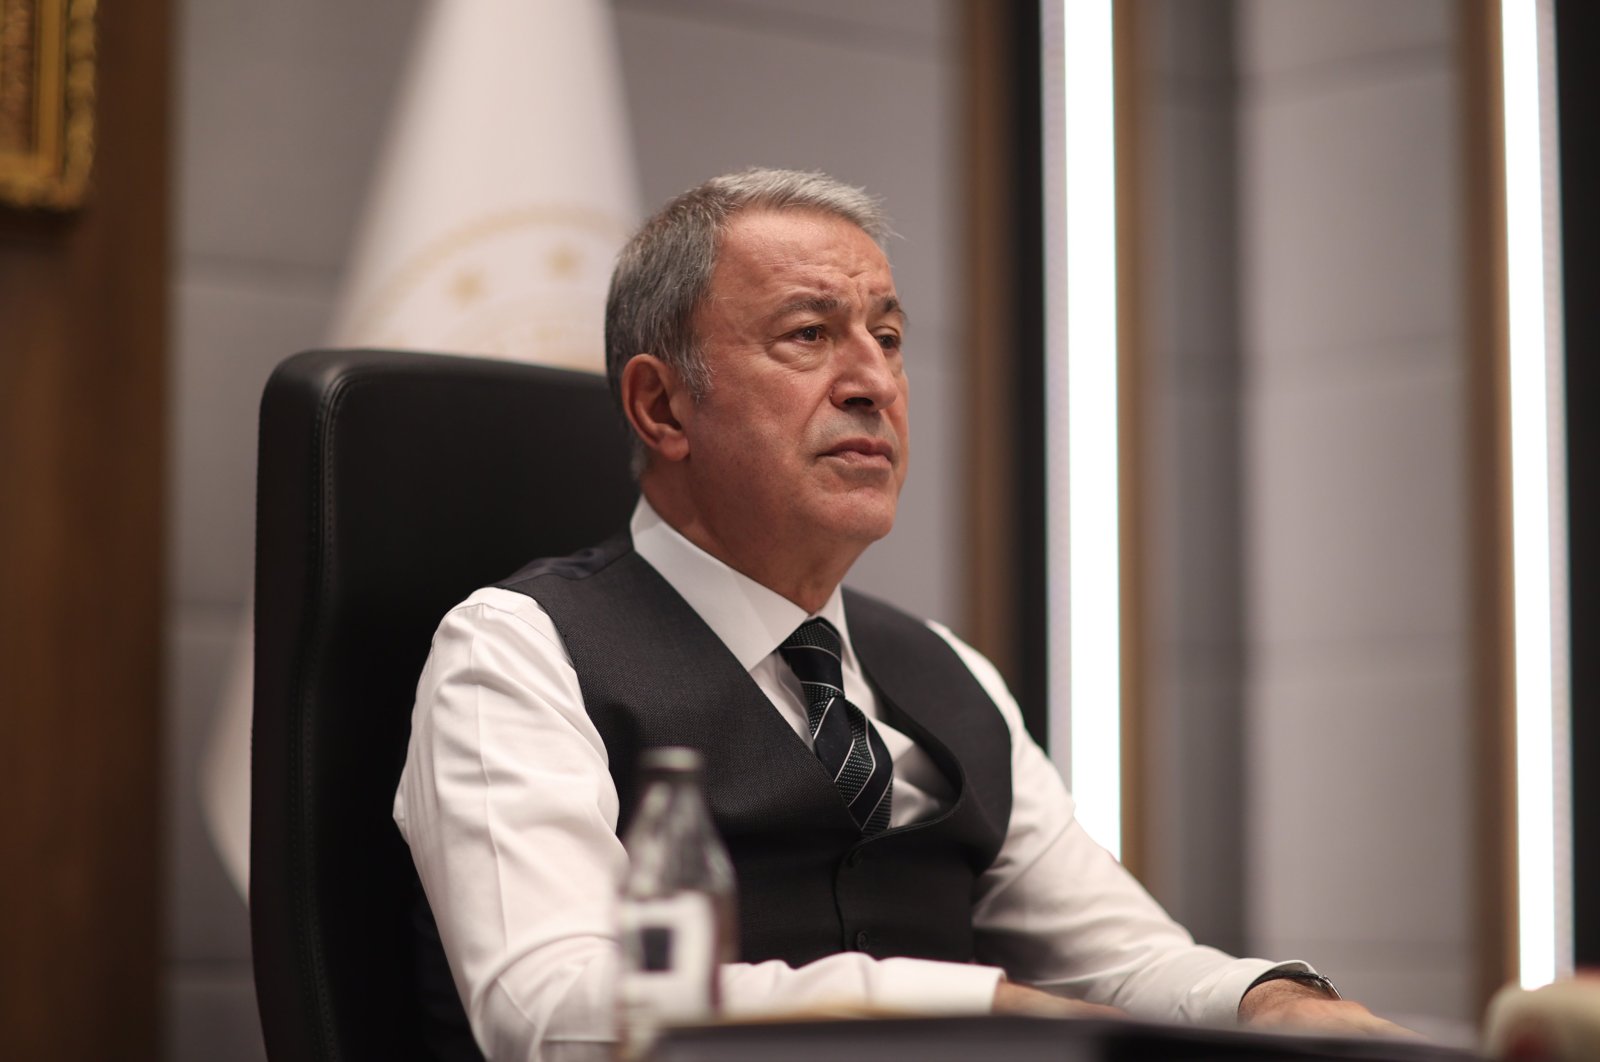 Defense Minister Hulusi Akar attends a meeting with commanders, Feb. 28, 2022. (DHA Photo)